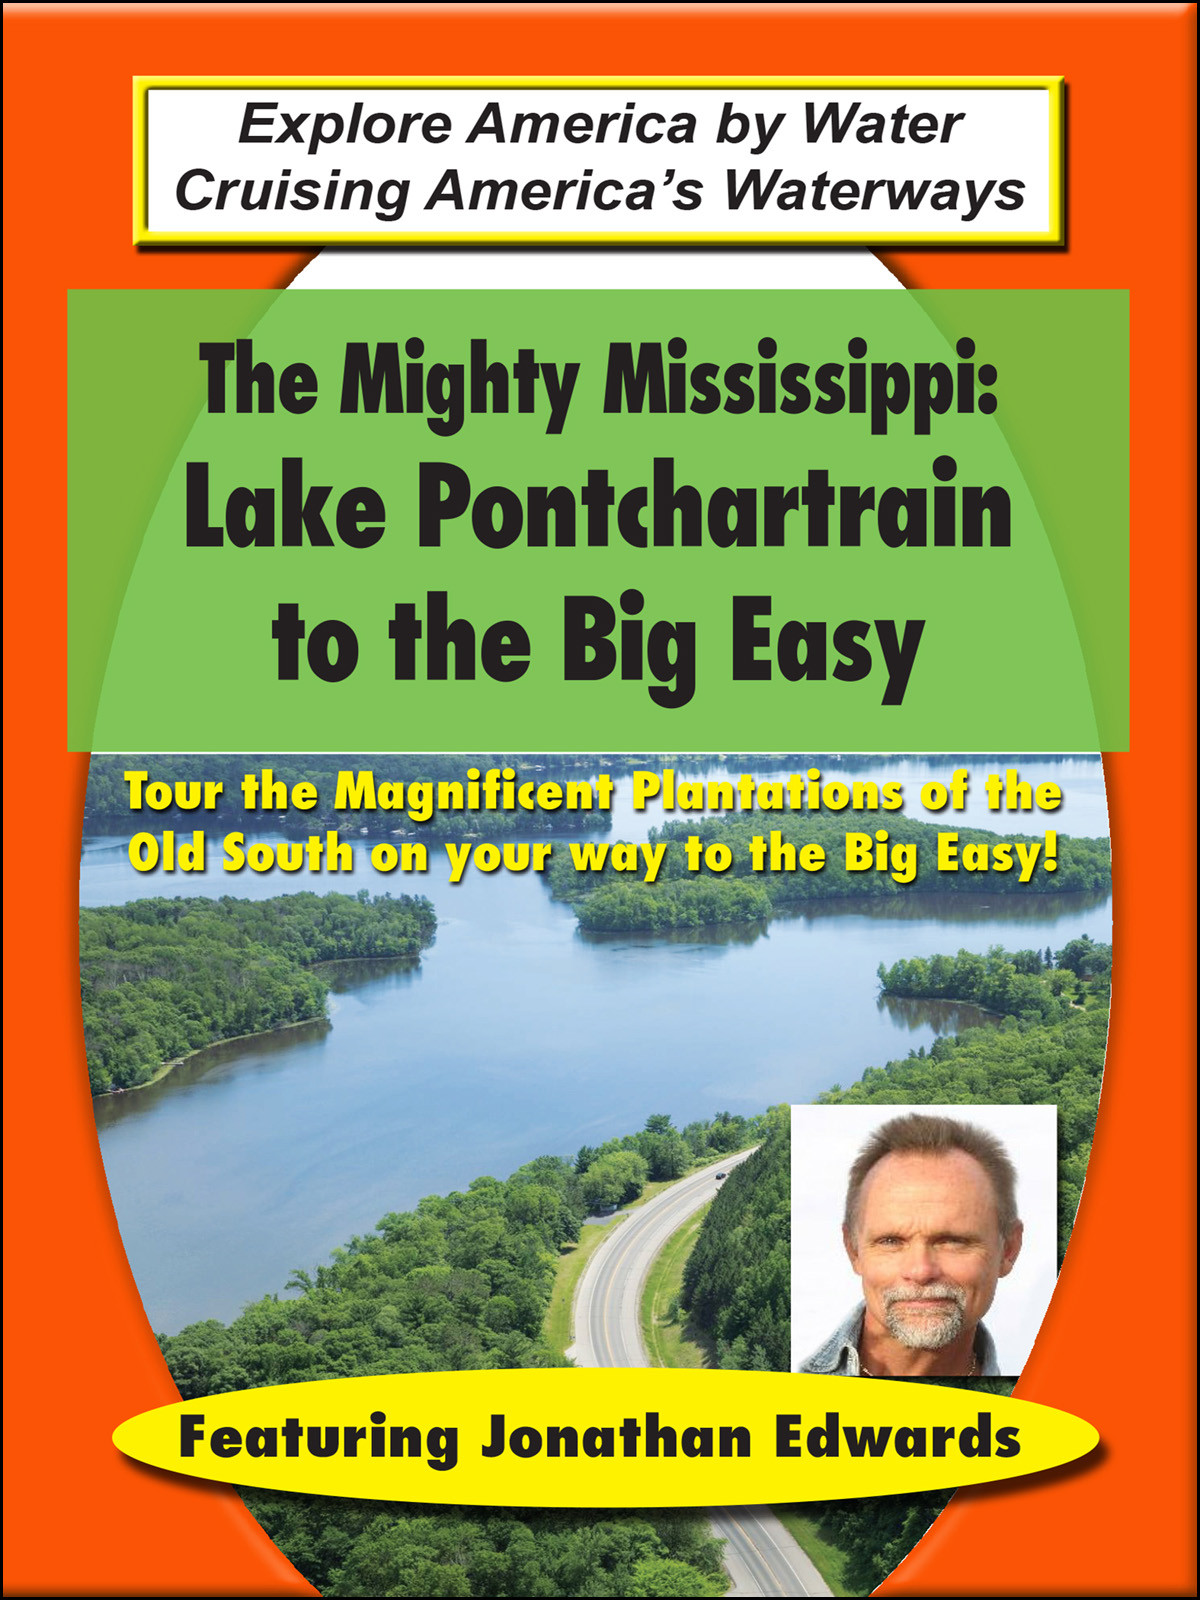 T8899 - The Mighty Mississippi LakeEPontchartrainEto the Big Easy